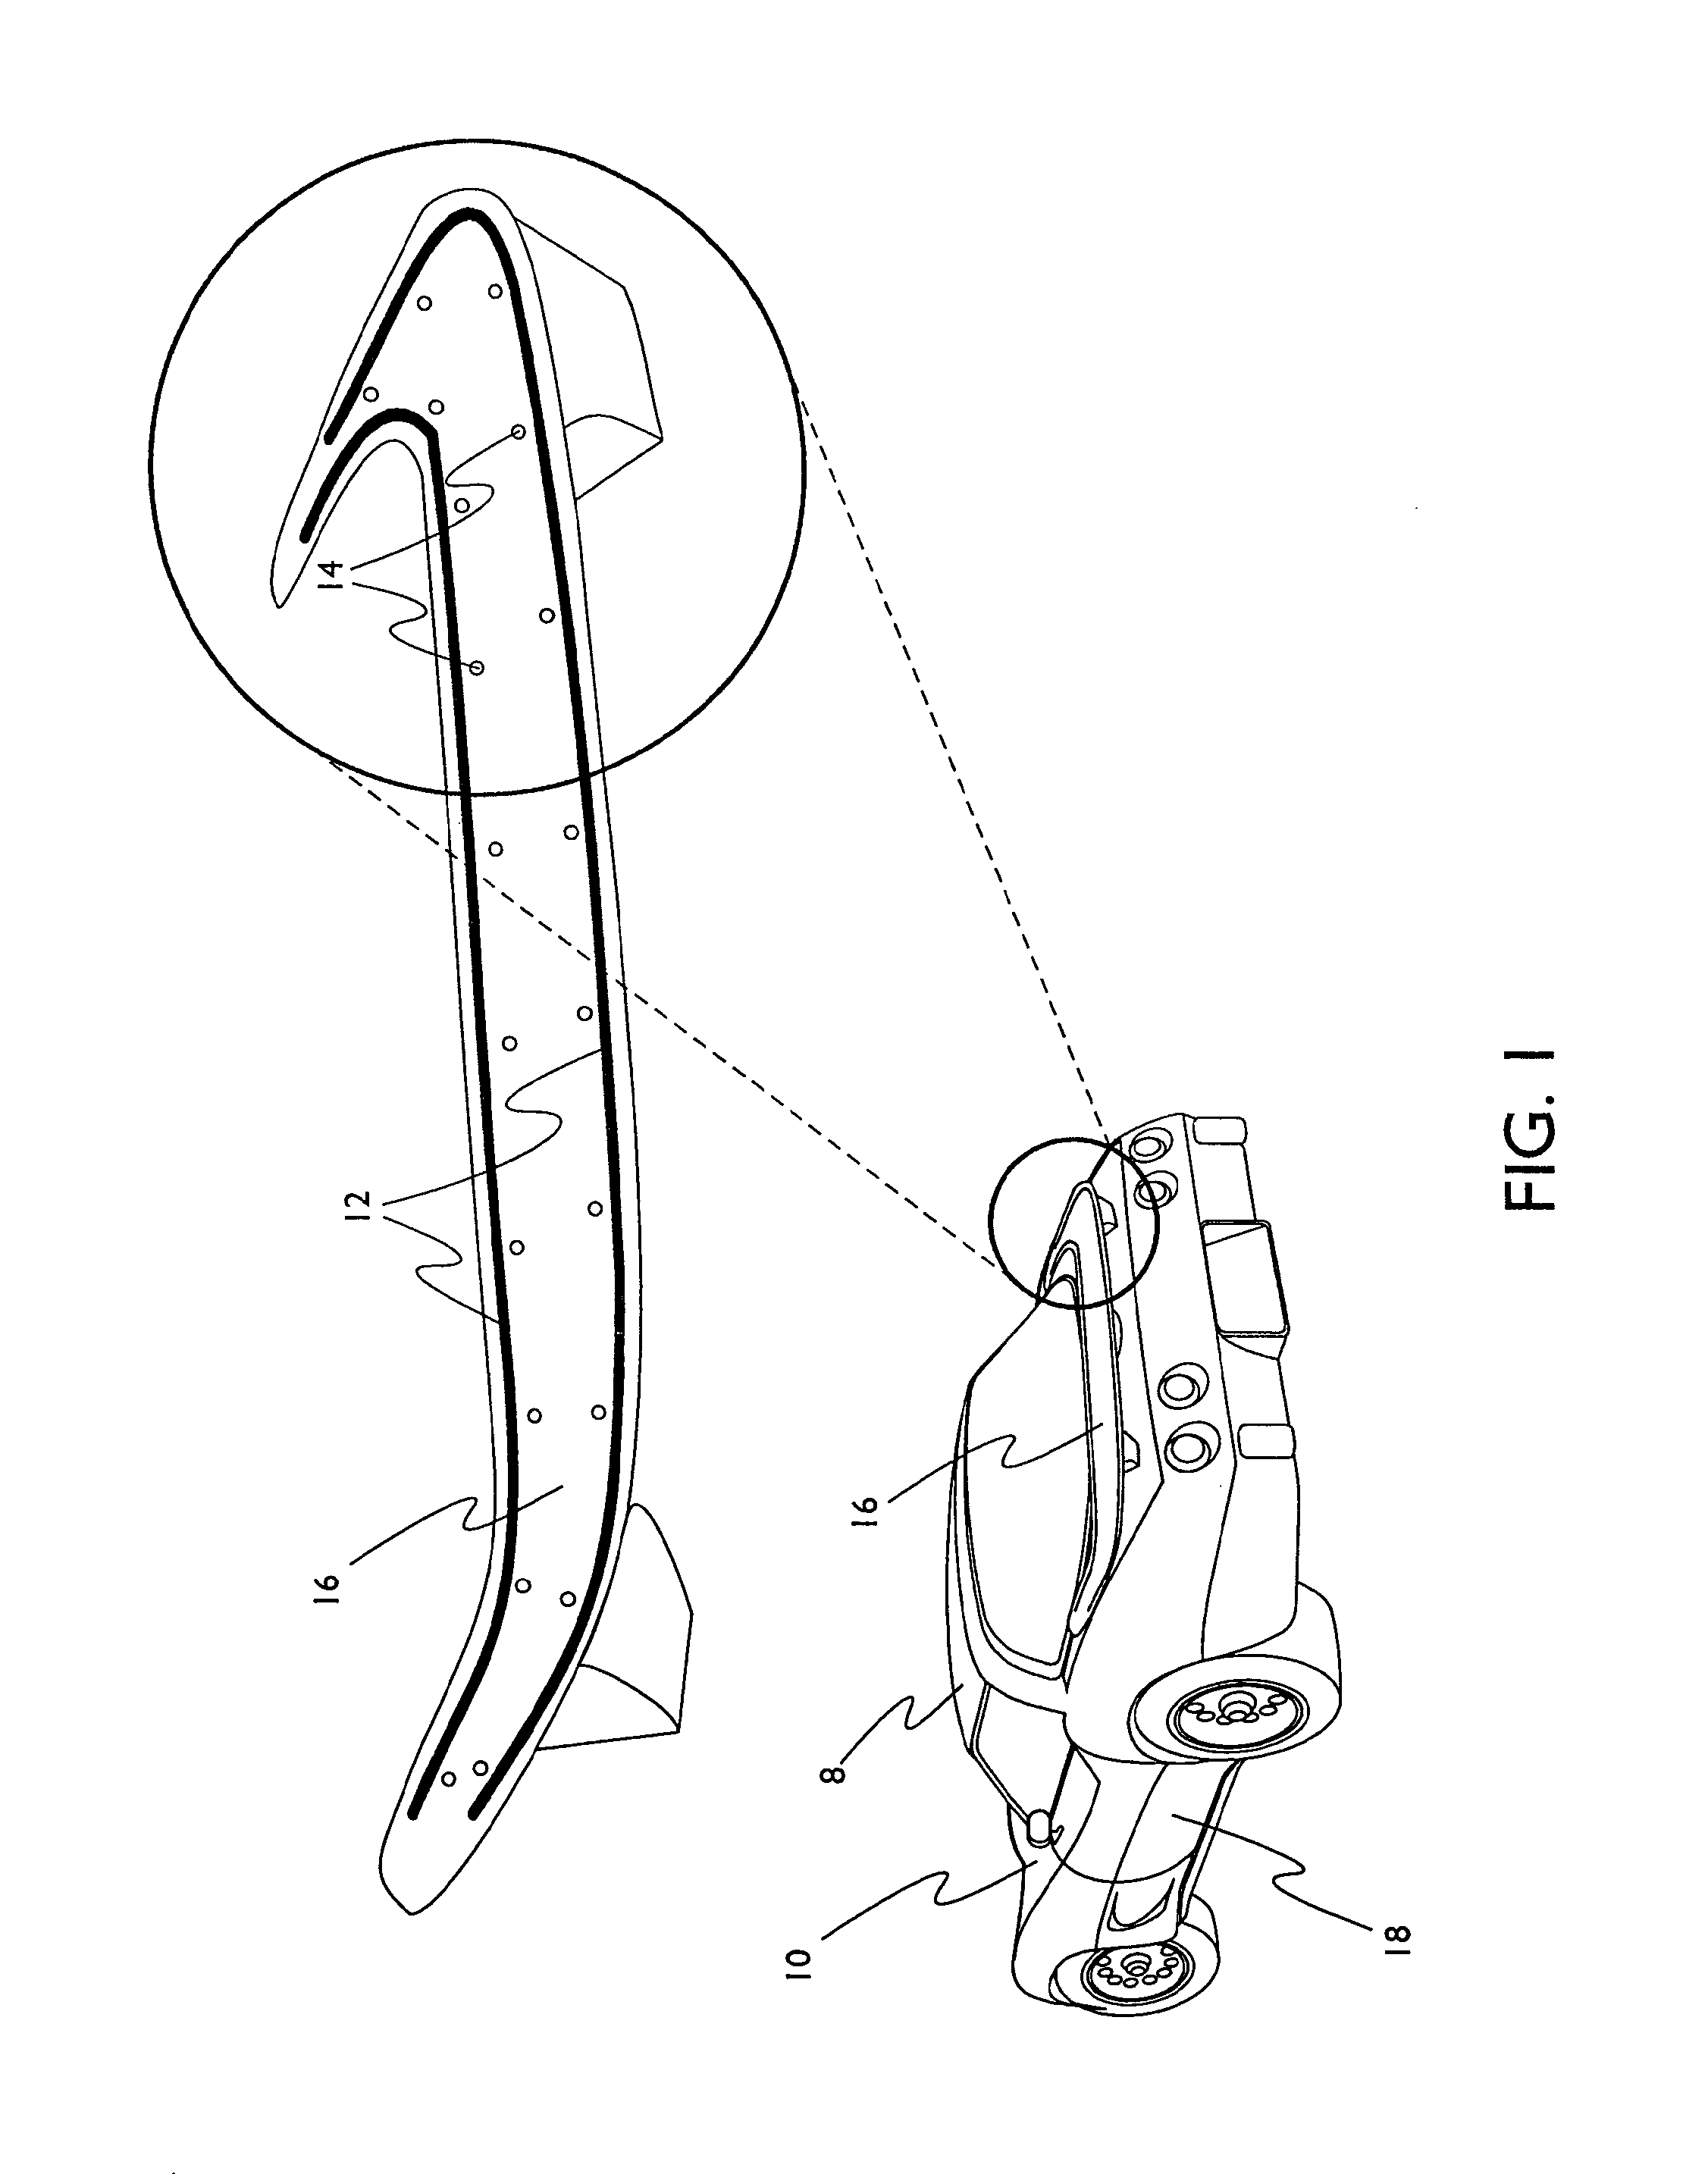 Method of controlling aircraft, missiles, munitions and ground vehicles with plasma actuators